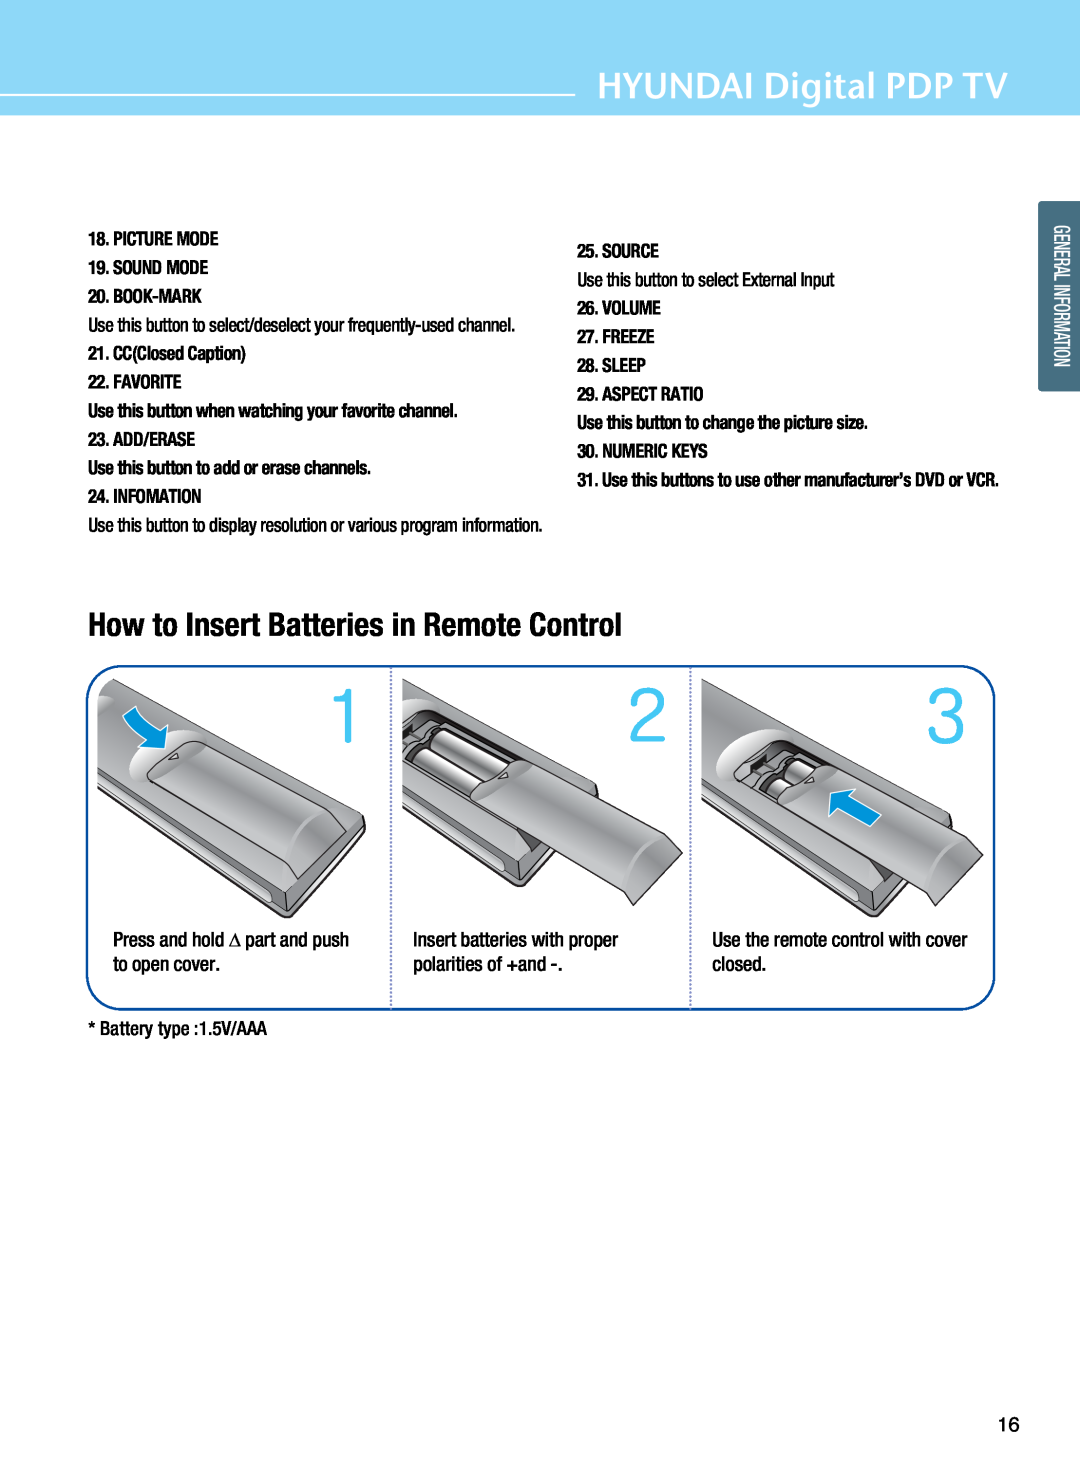 Hyundai Q421H How to Insert Batteries in Remote Control, HYUNDAI Digital PDP TV, PICTURE MODE 19. SOUND MODE 20. BOOK-MARK 